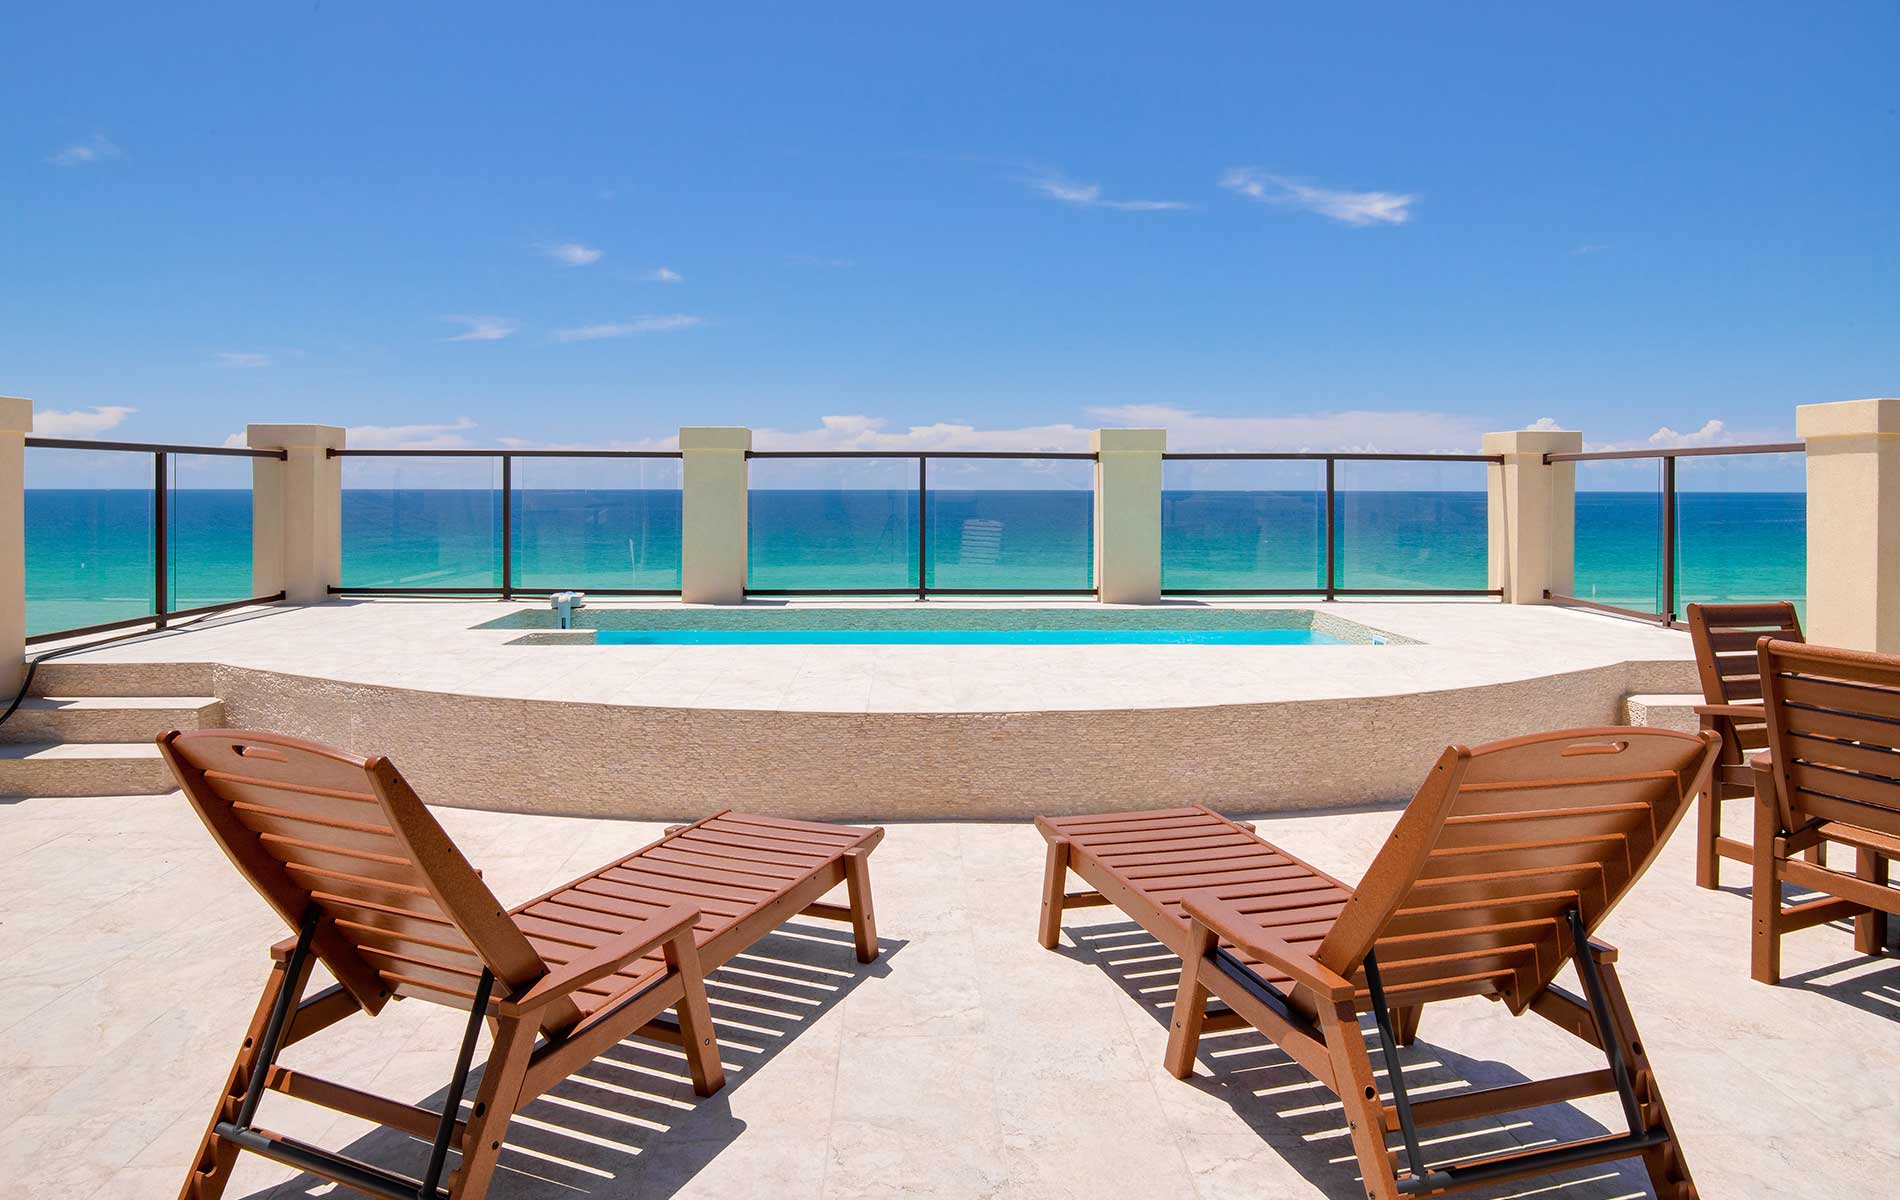 It doesn’t get much better than the view of the Gulf of Mexico from 4720 Ocean Boulevard in Destin, Florida! This seven-bedroom home with private rooftop pool and sundeck is for sale through Scenic Sotheby’s International Realty. Contact Blake Morar for information at (850) 231-6052.